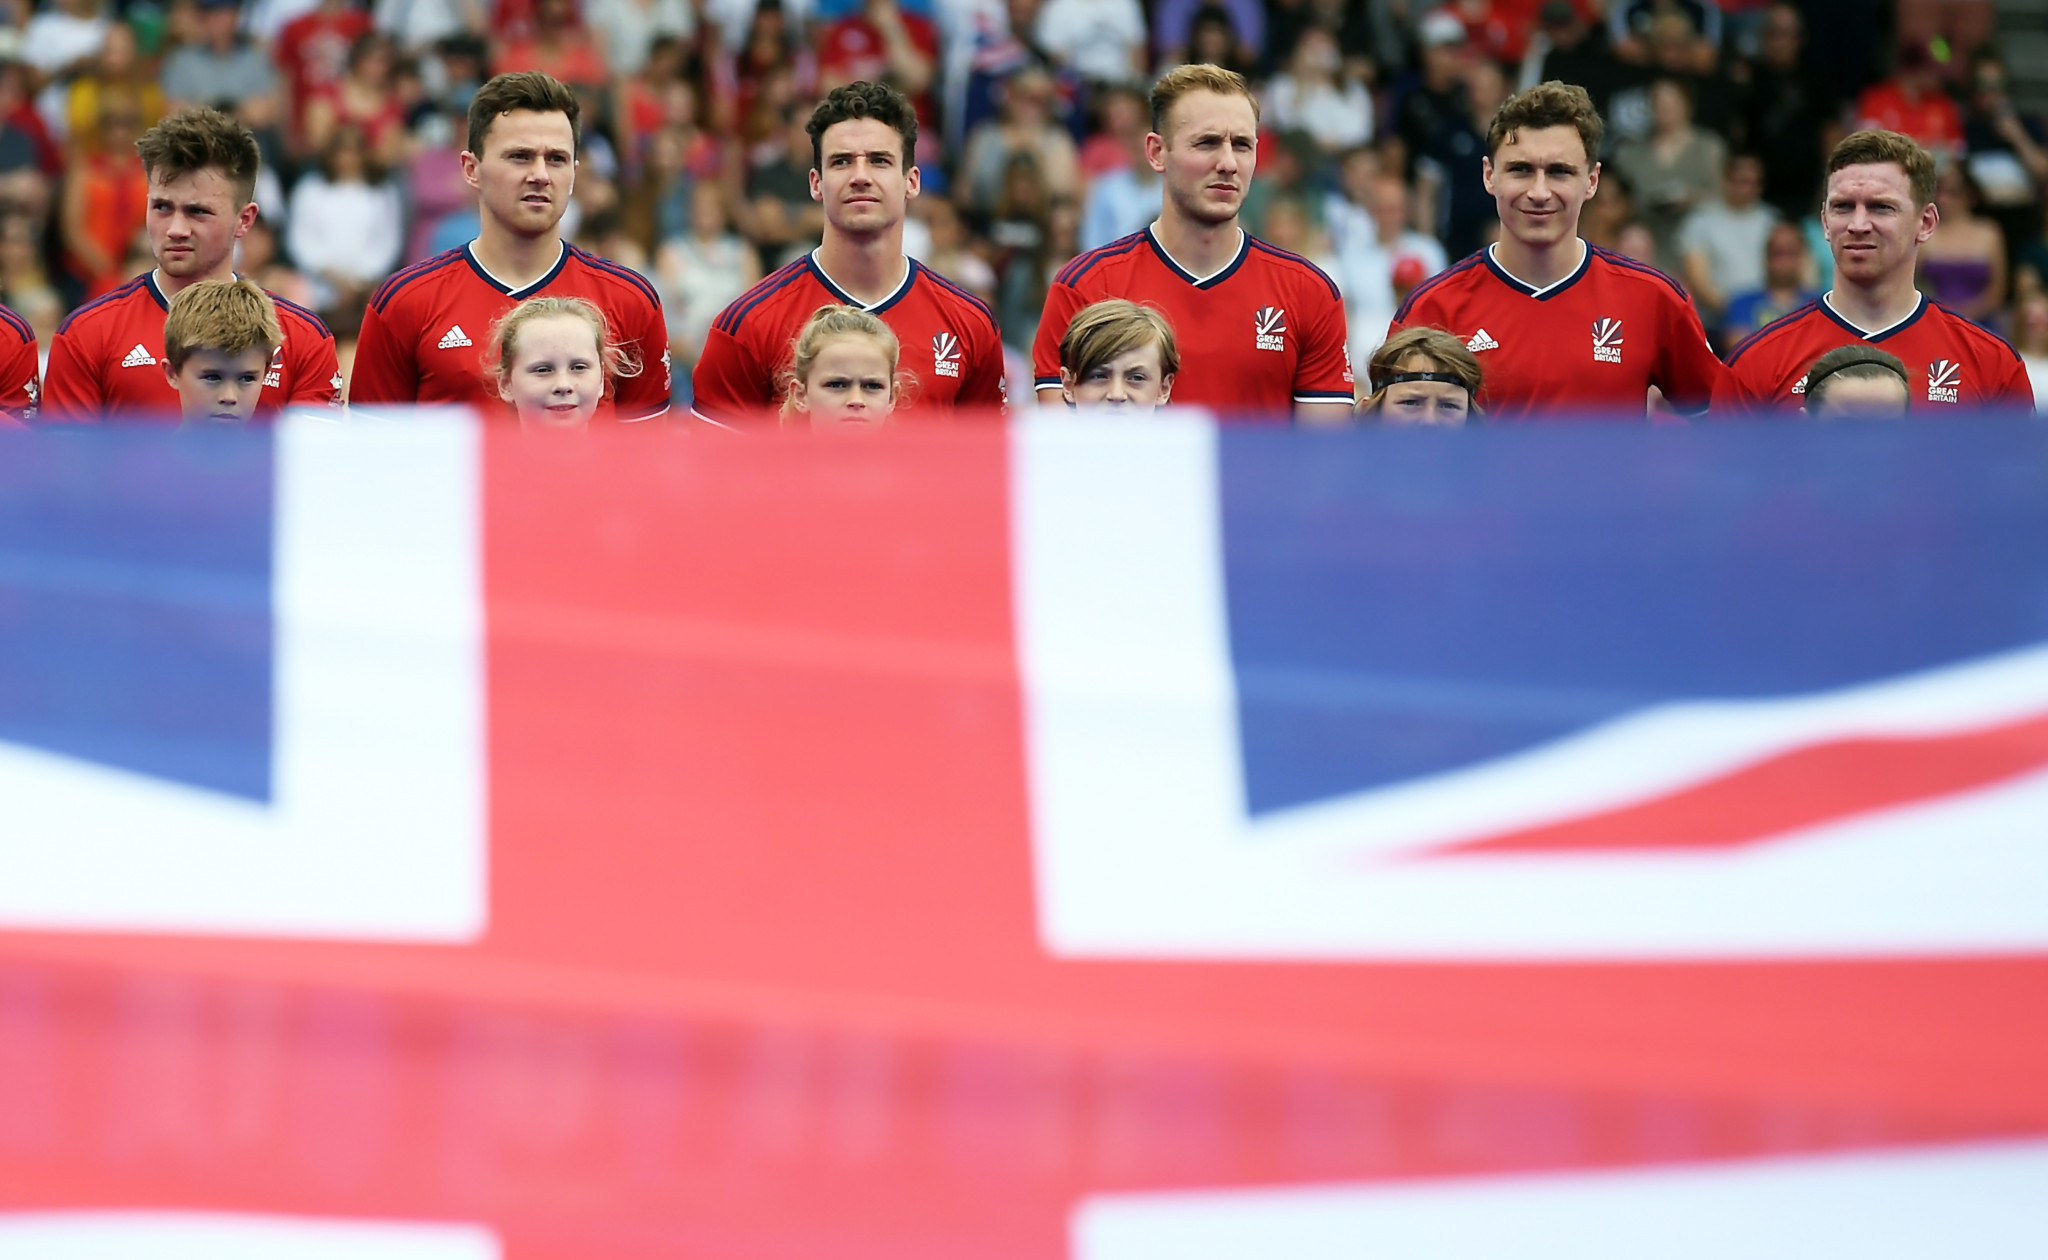 Britain leapfrog Argentina and pinch Grand Final place in Men's FIH Pro League 